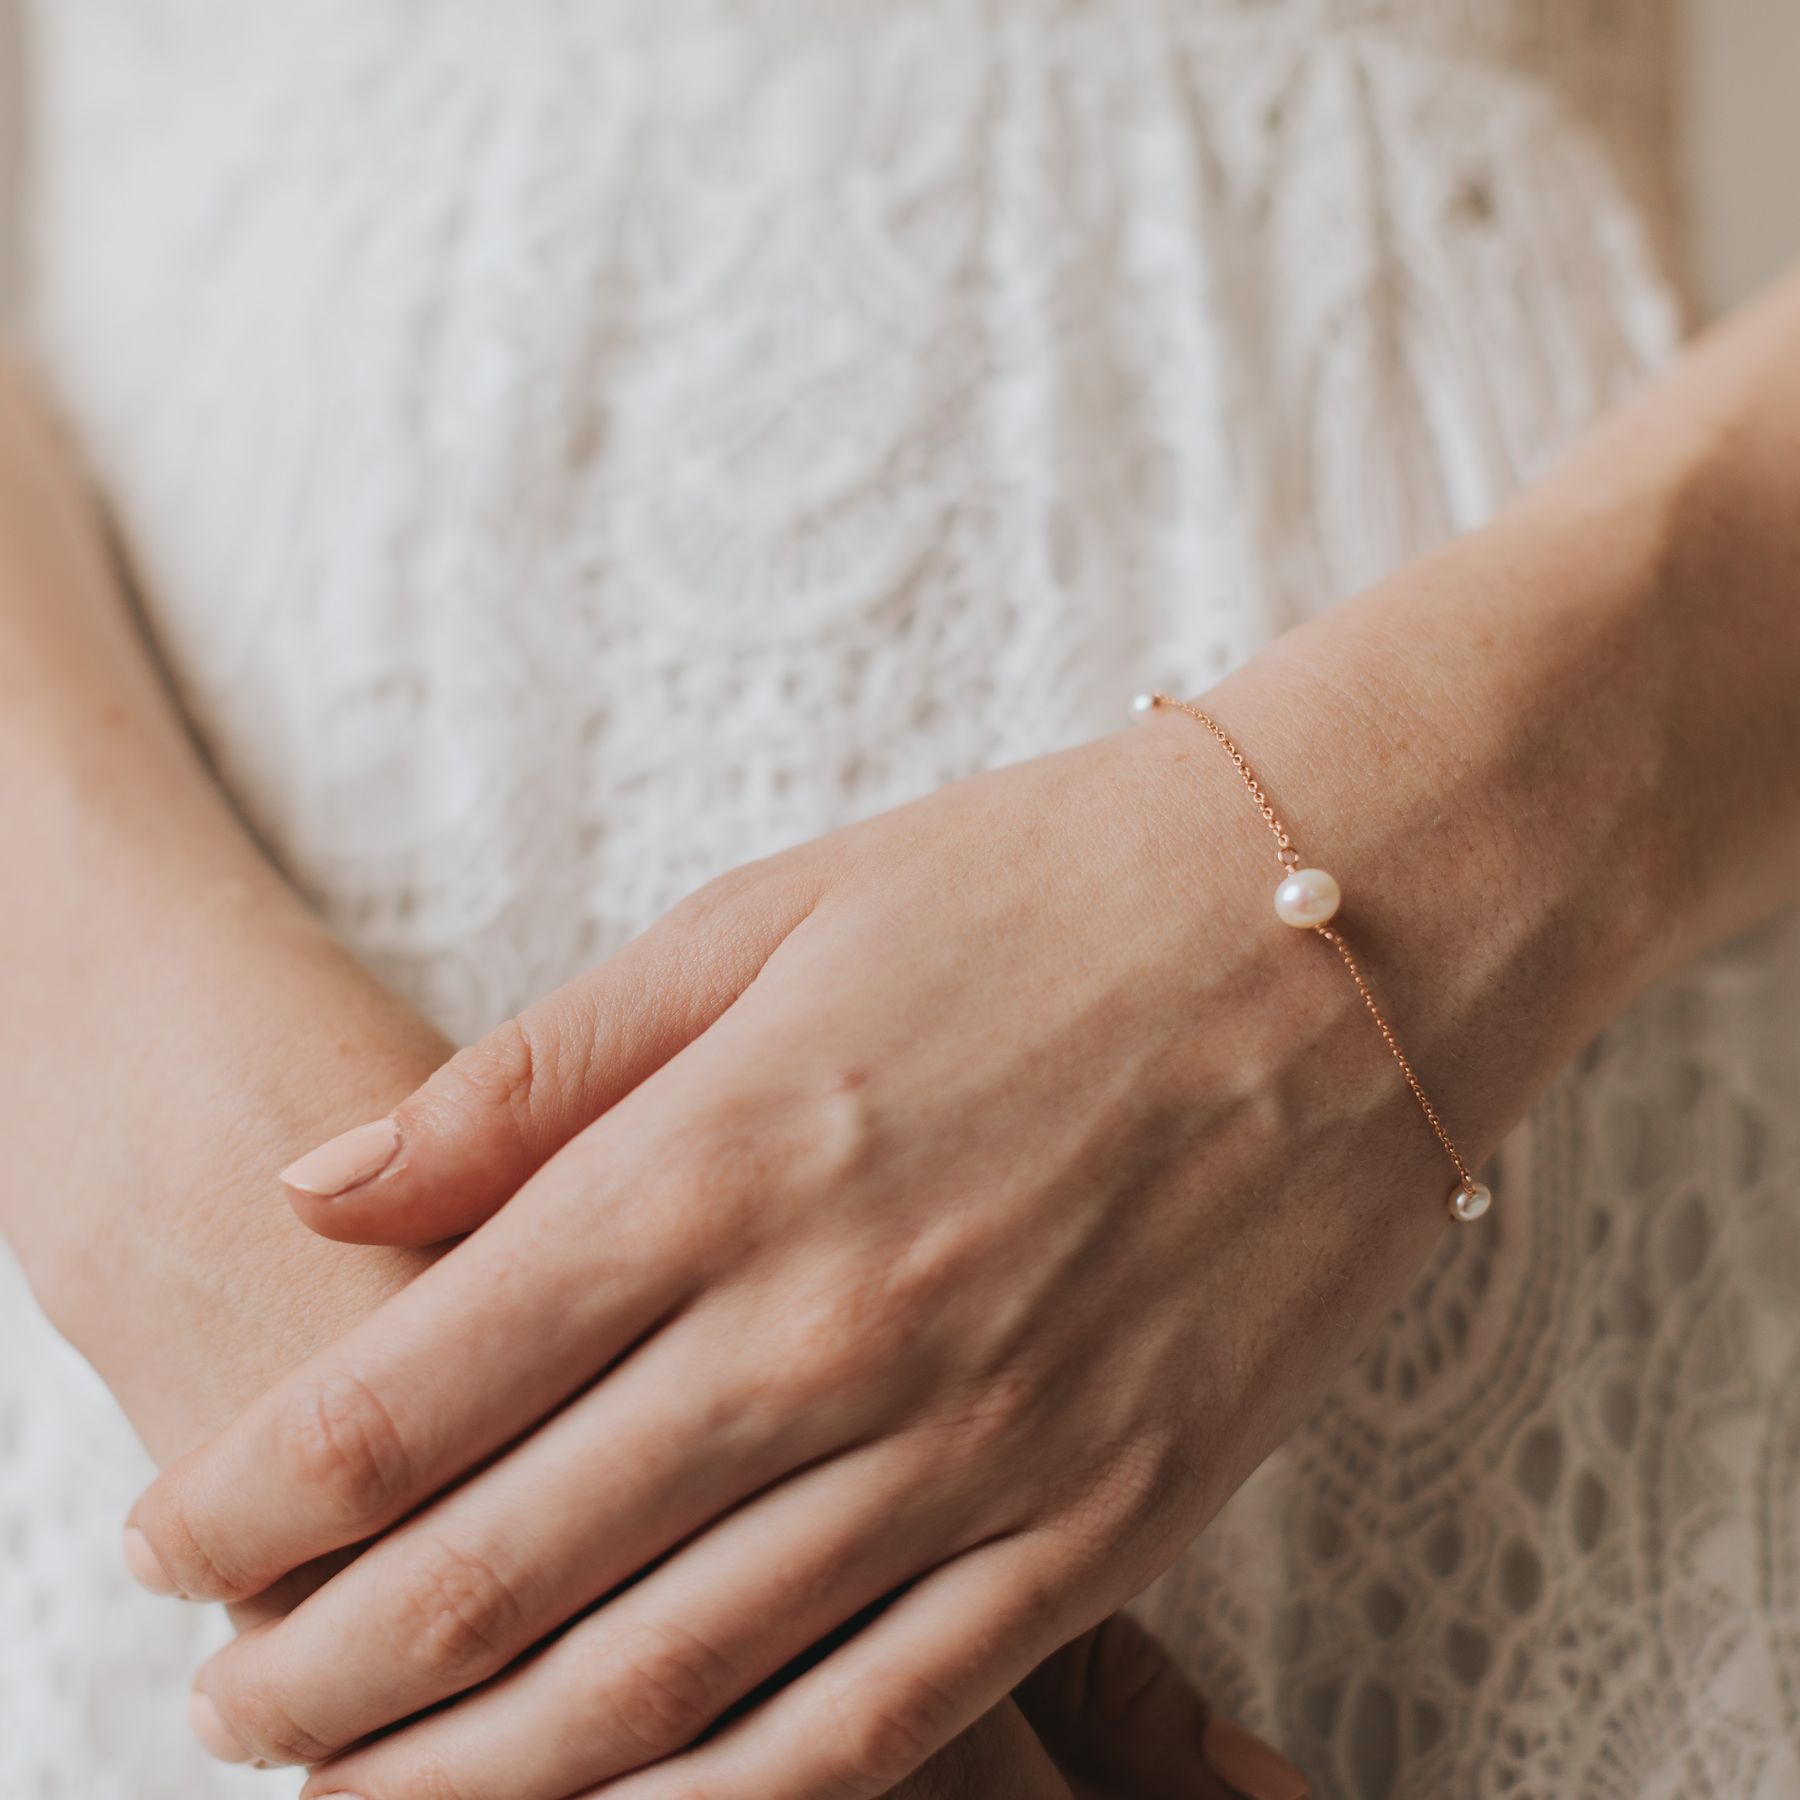 https://www.rockmywedding.co.uk/1800x1800/wp-content/gallery/liberty-in-love-1/Annabel-rose-gold-pearl-bracelet-by-Chez-Bec-at-Liberty-in-Love-%C2%A344.jpg?fit=1